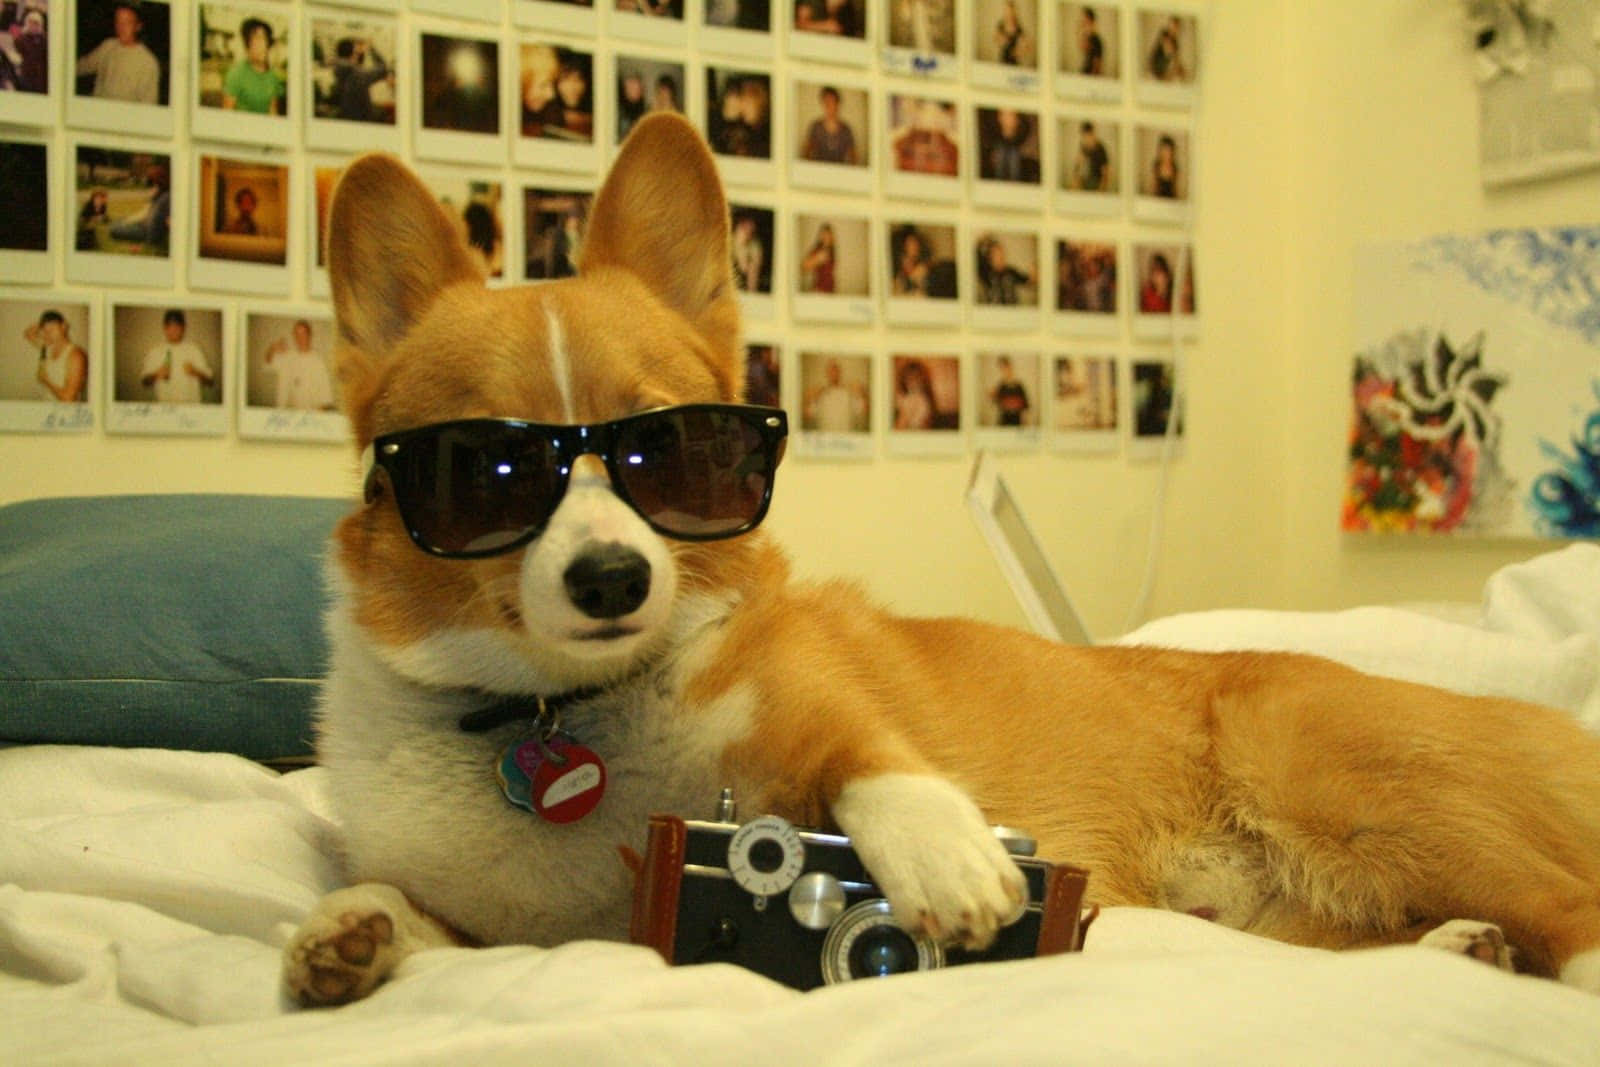 "This Corgi is here to put a smile on your face!"